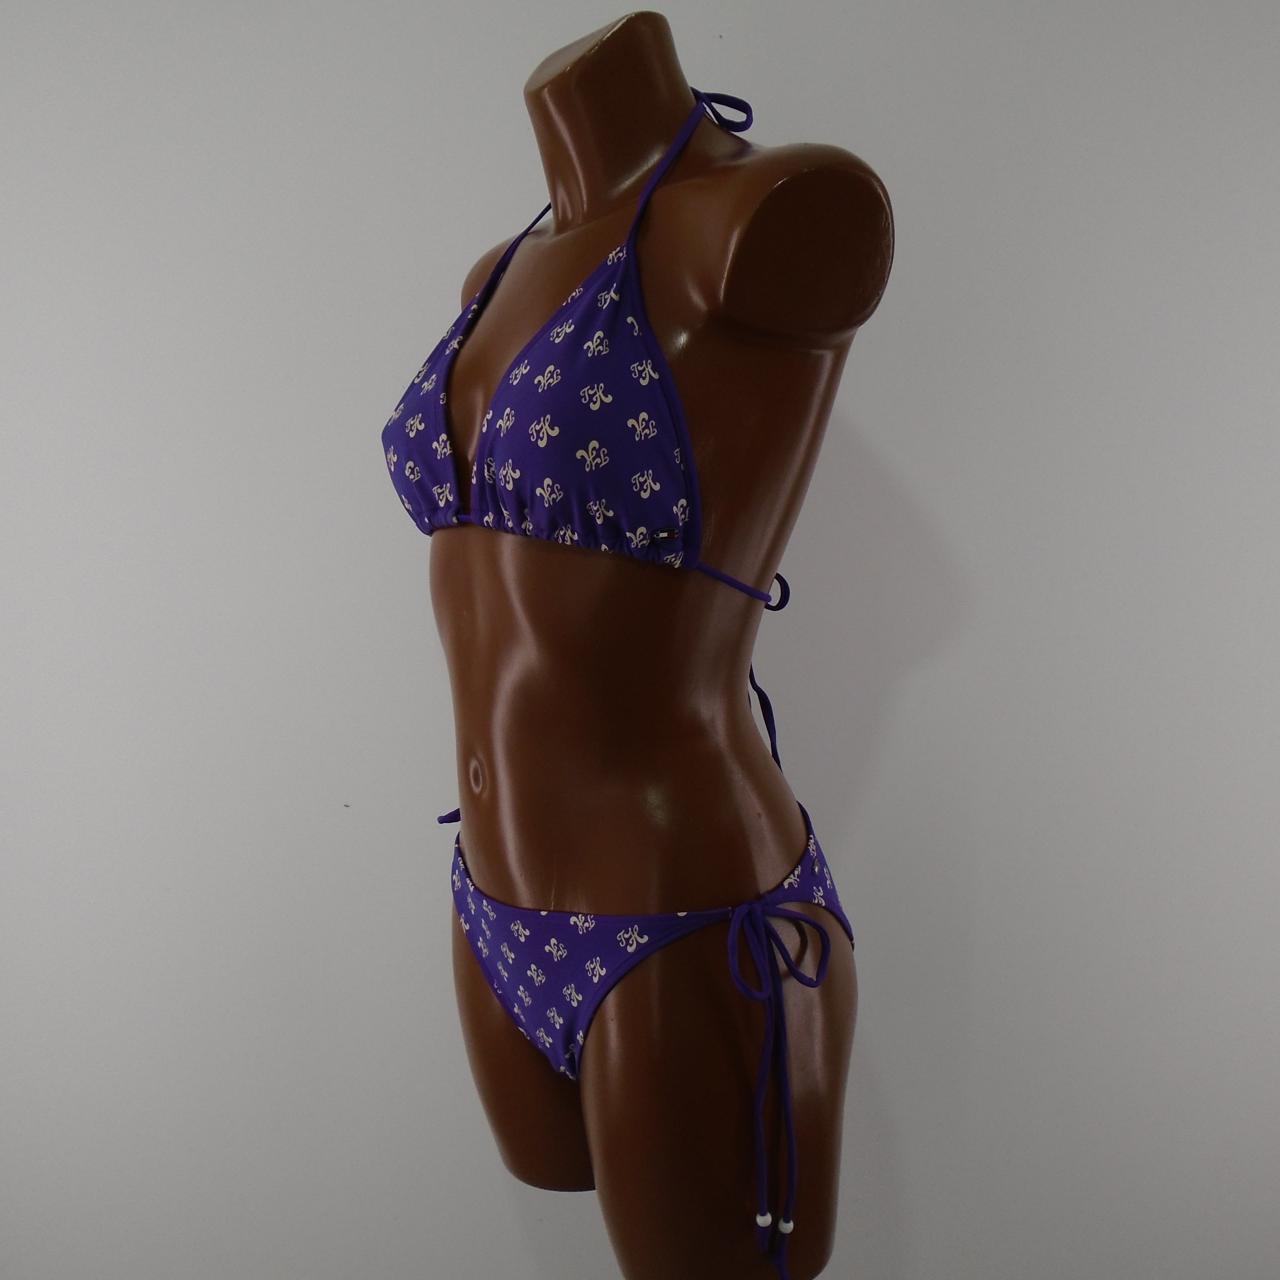 Women's Swimsuit Tommy Hilfiger. Multicolor. XL. Used. Very good